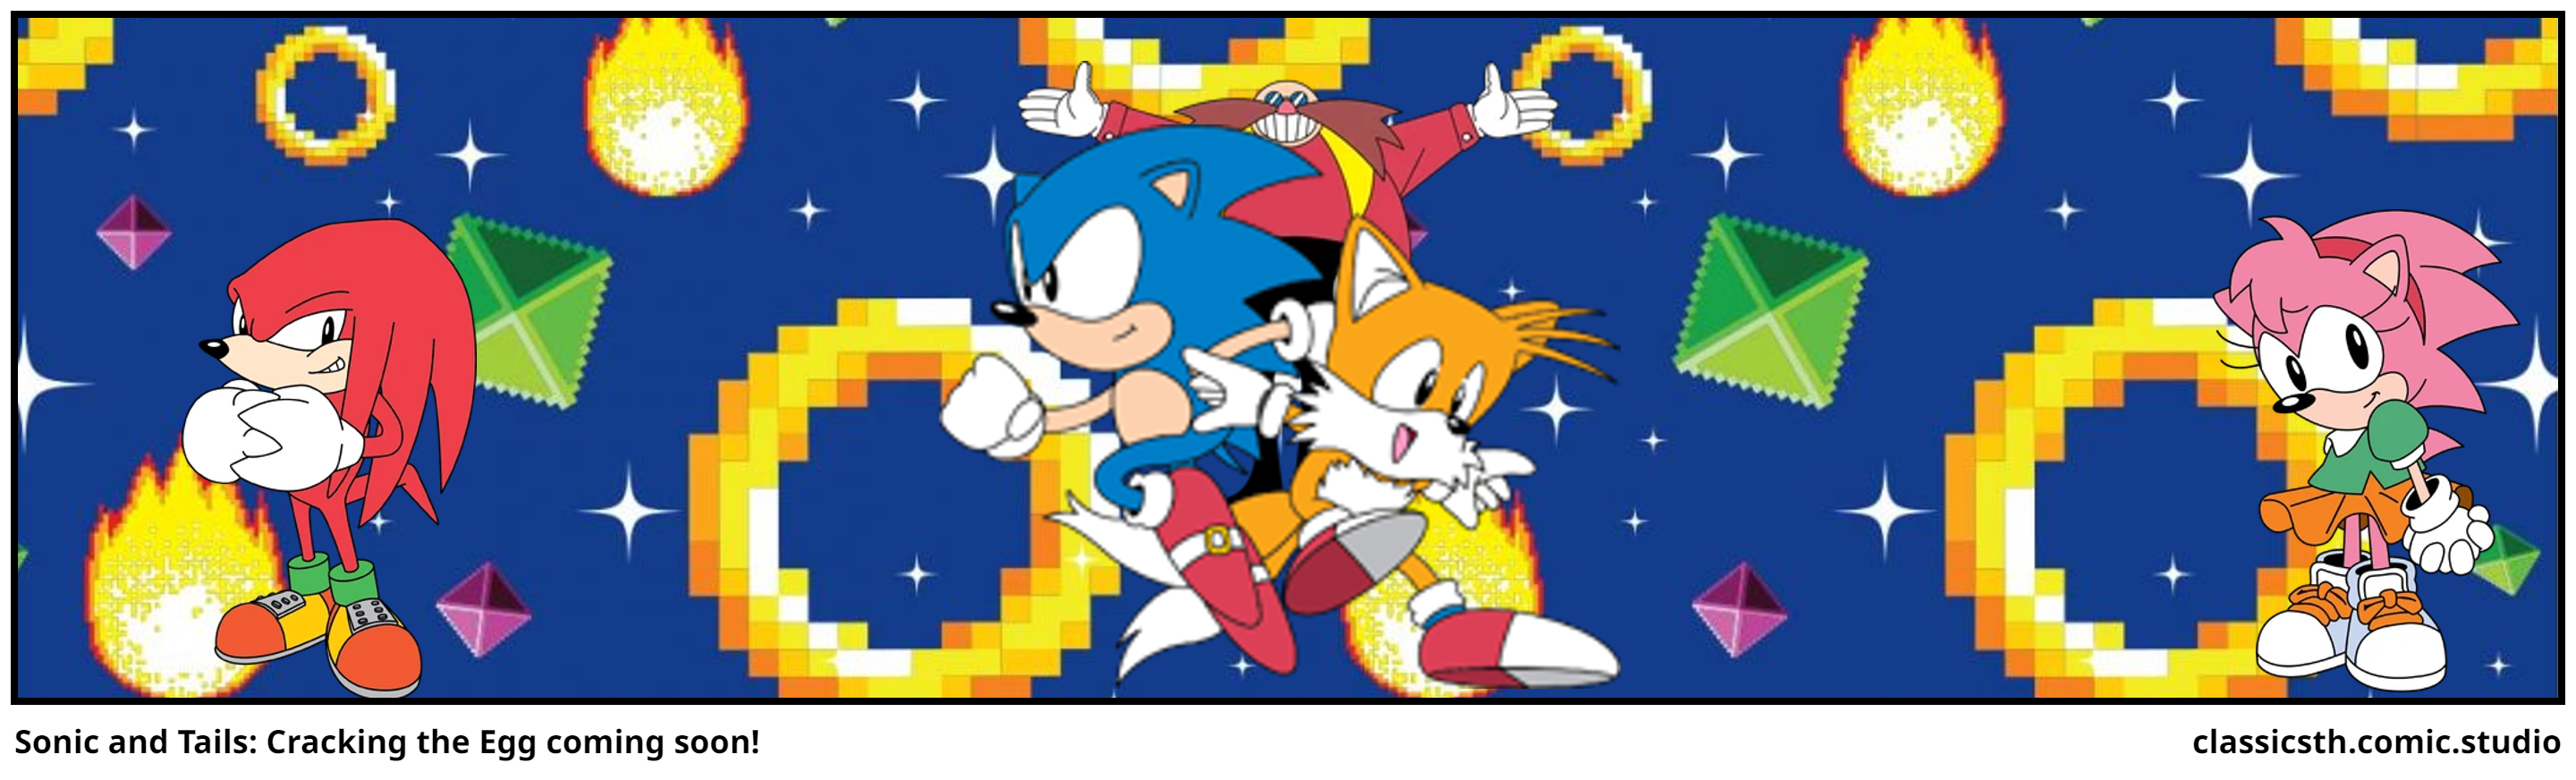 Sonic and Tails: Cracking the Egg coming soon!